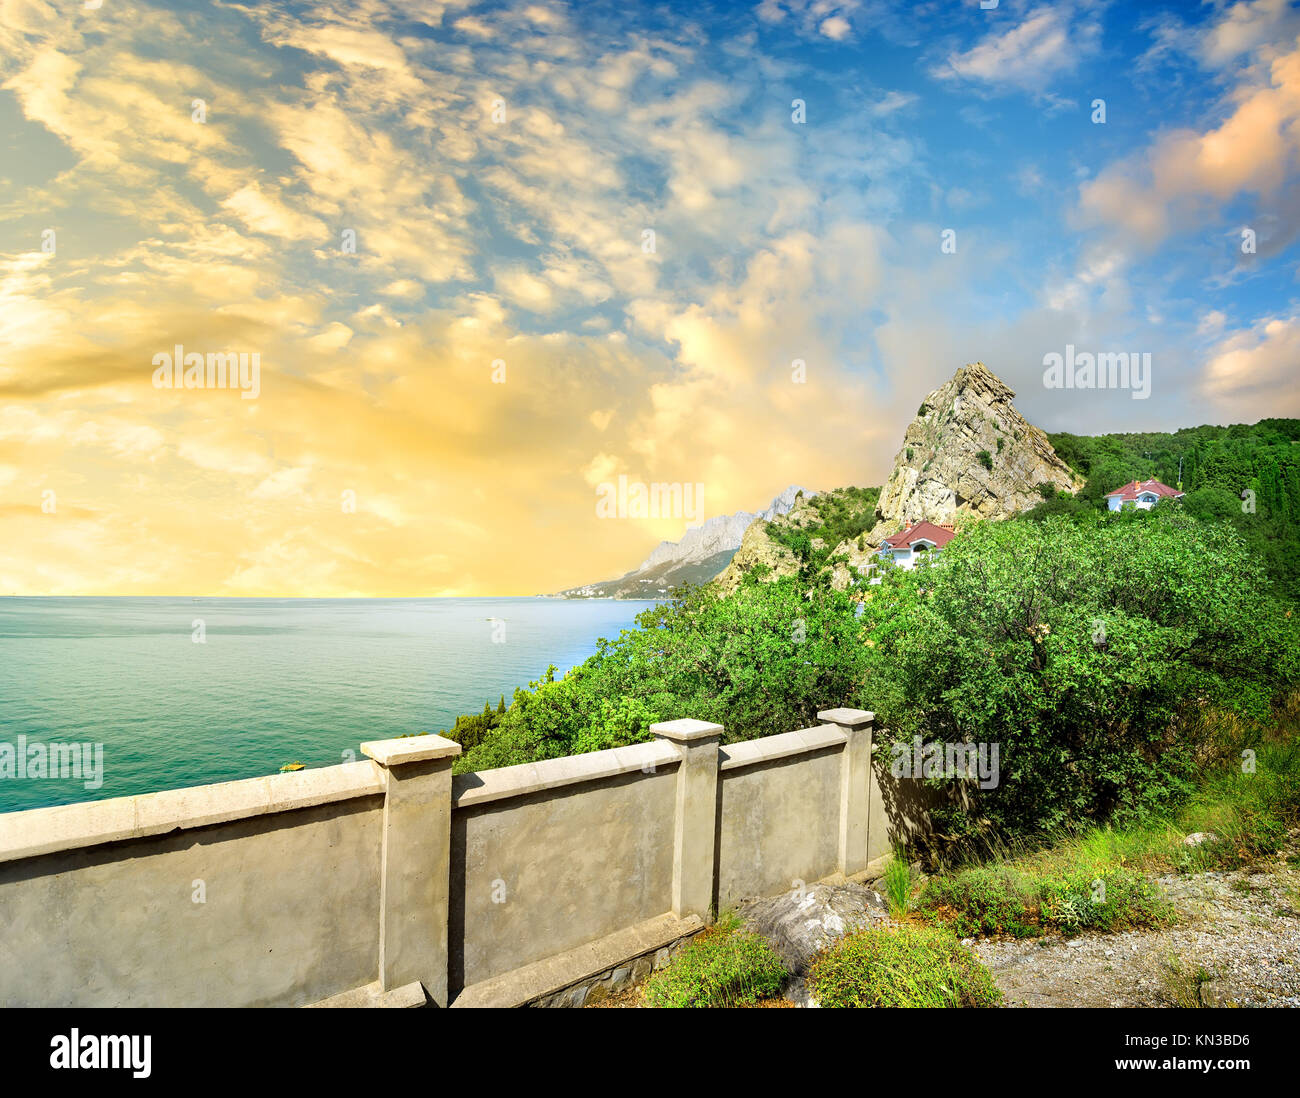 Observation deck on the mountain Iphigenia in Crimea. Stock Photo